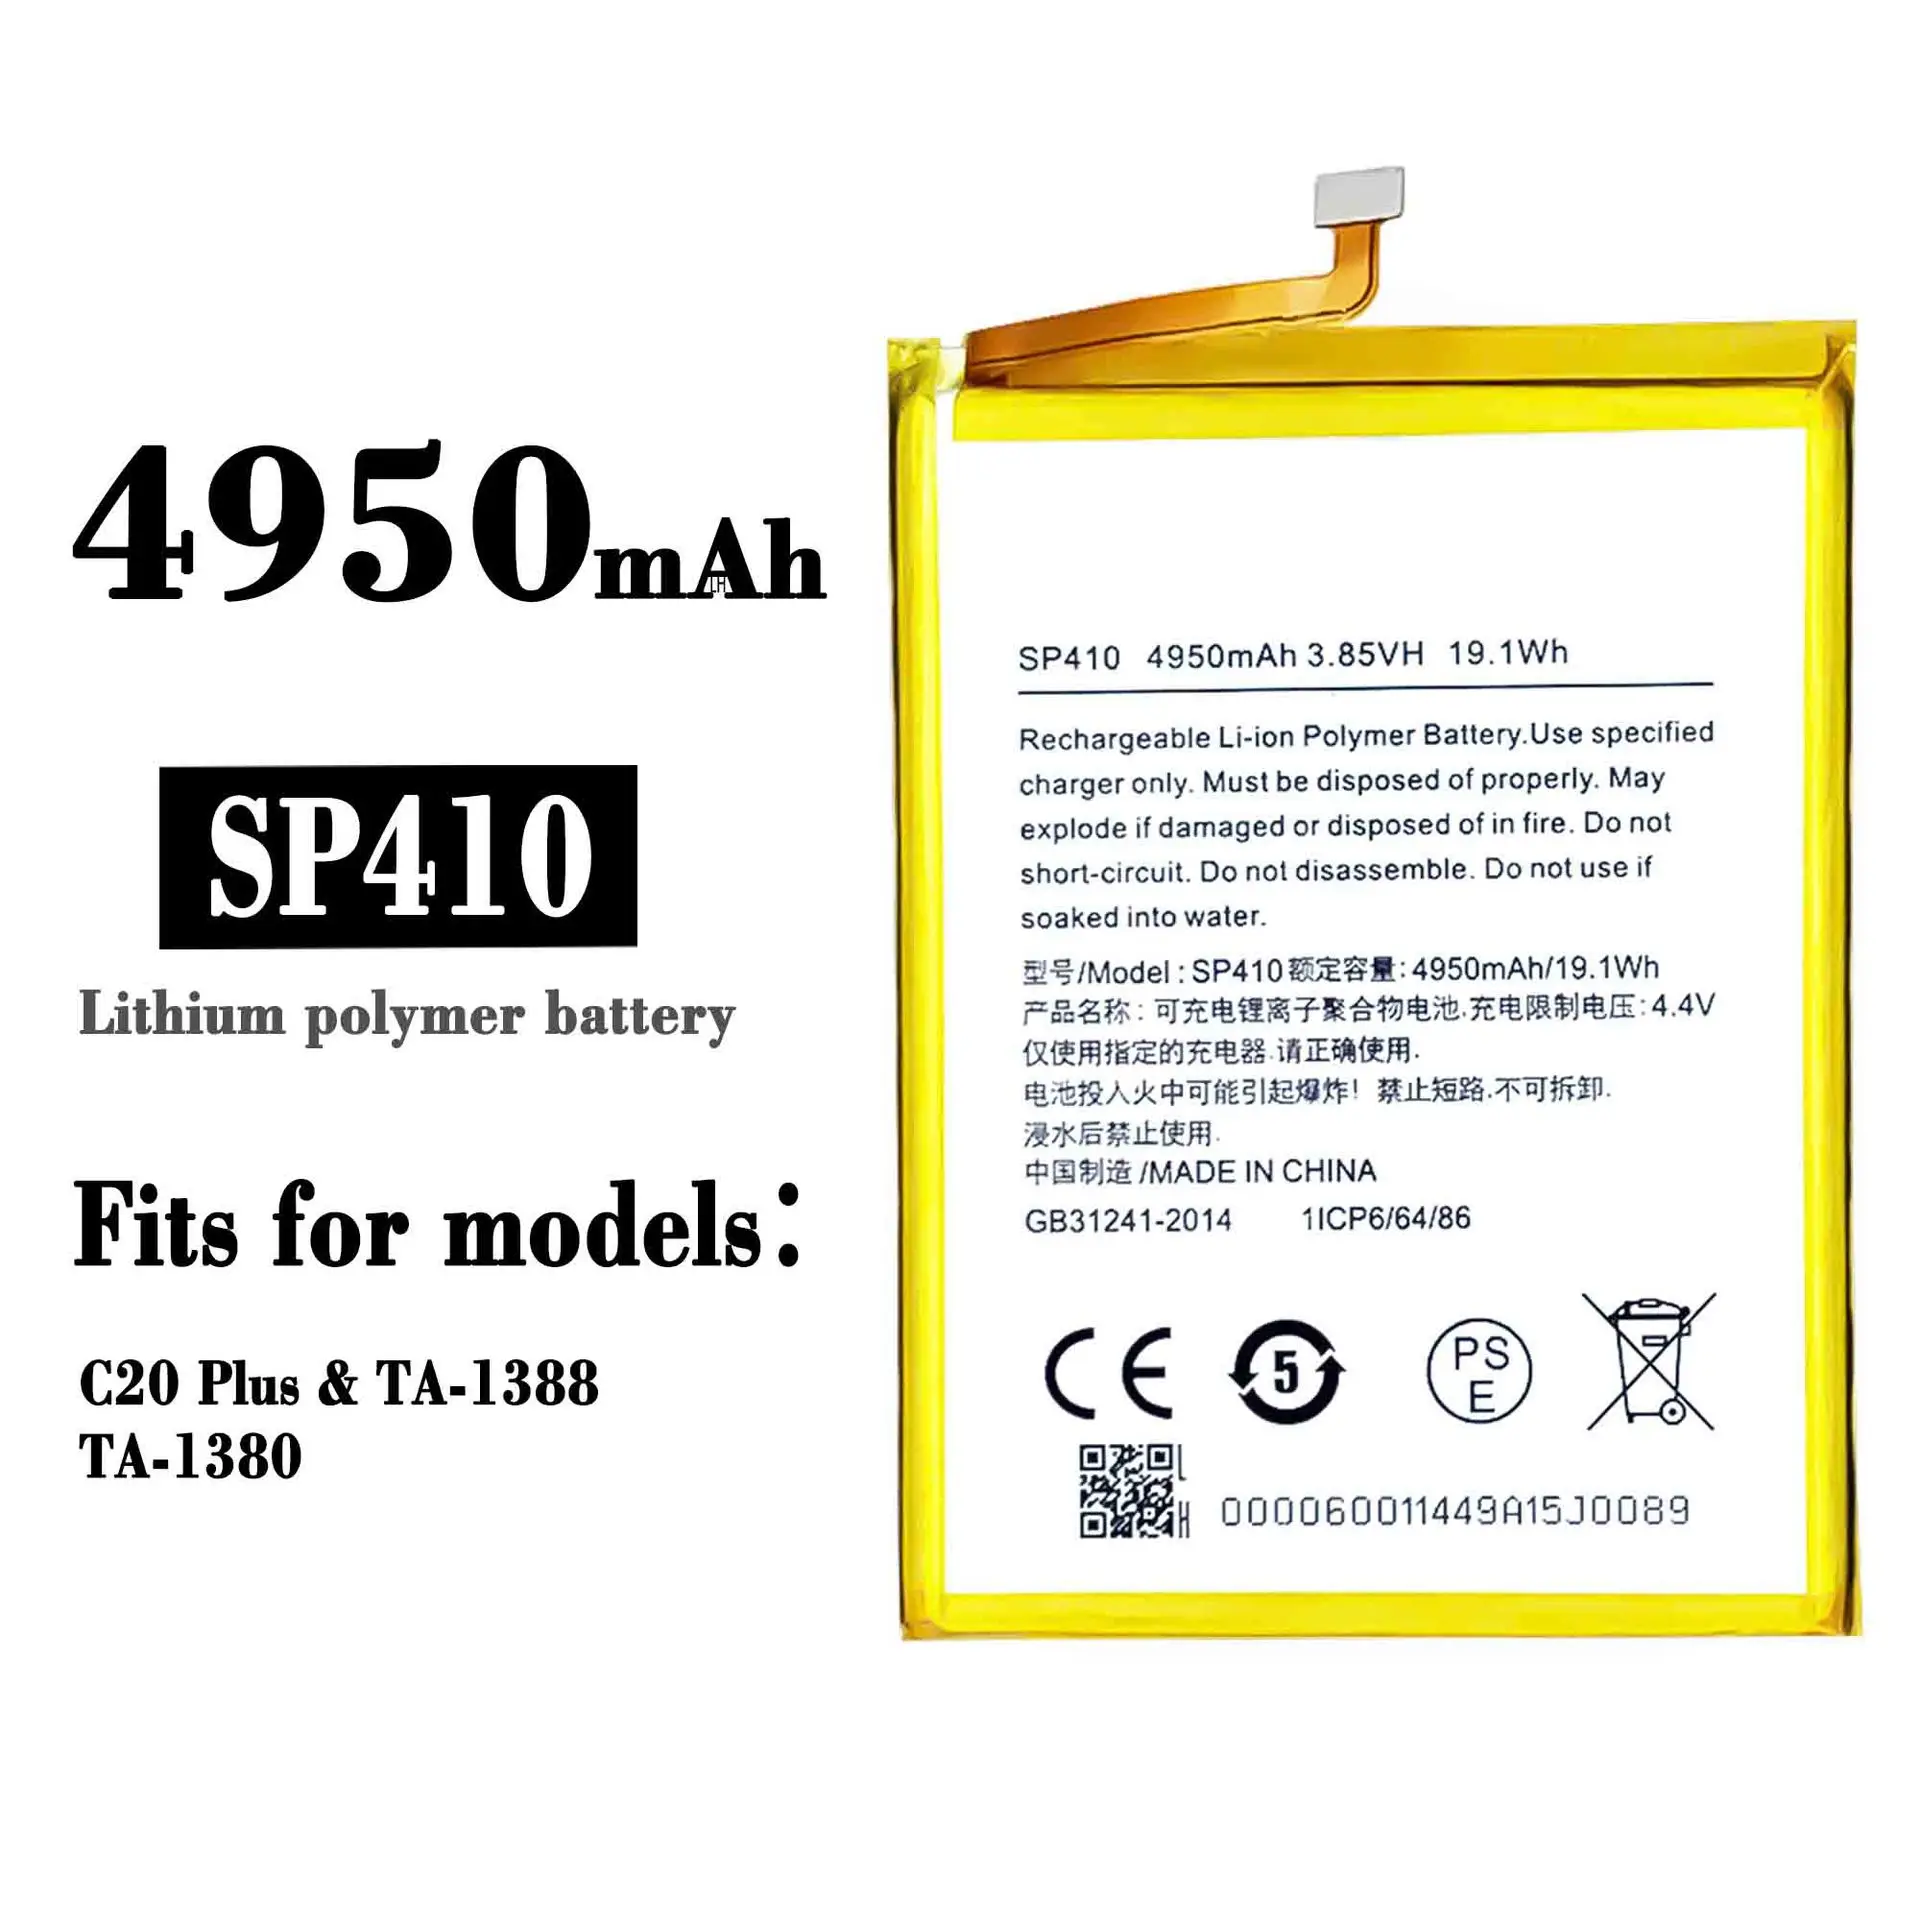 

100% High Quality Replacement Battery For Nokia C20 Plus TA-1388 TA-1380 SP410 Mobile Phone Large Capacity New Batteries